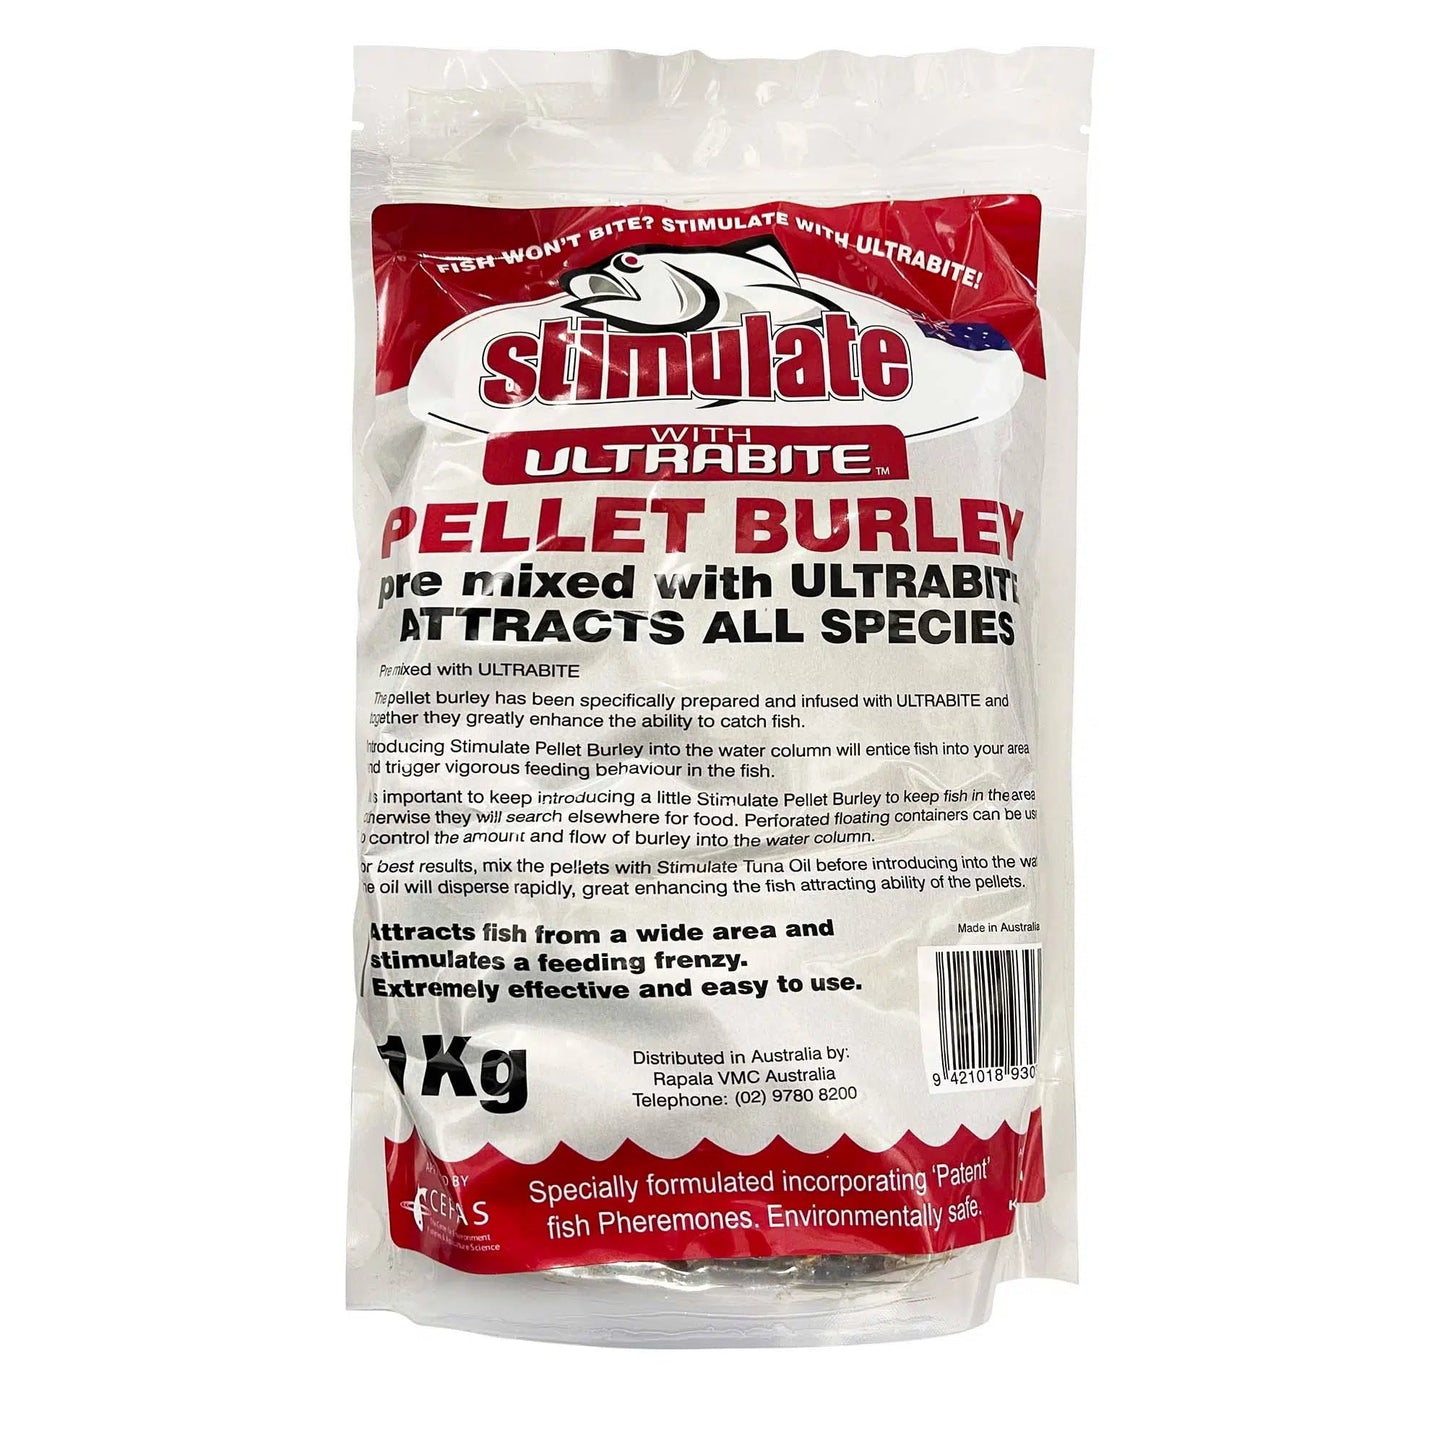 Stimulate Pellet Berley Pre Mixed with Ultrabite 1kg-Bait Collecting & Burley-Stimulate-Fishing Station